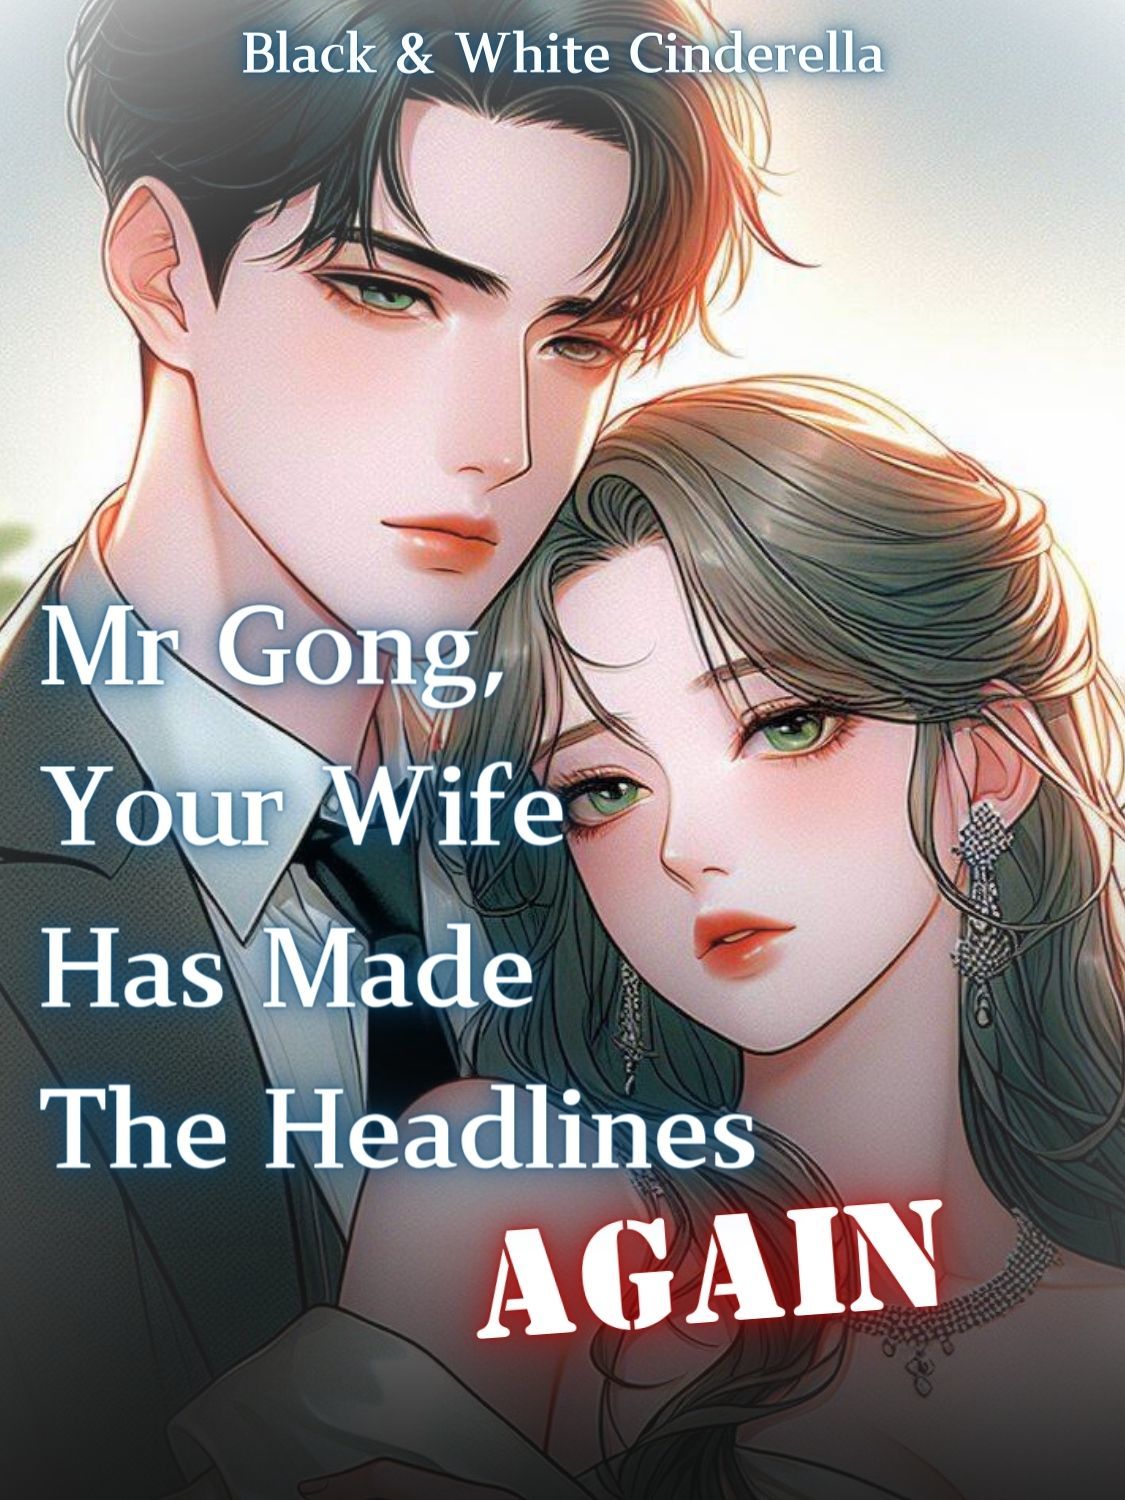 Mr Gong, Your Wife Has Made The Headlines Again